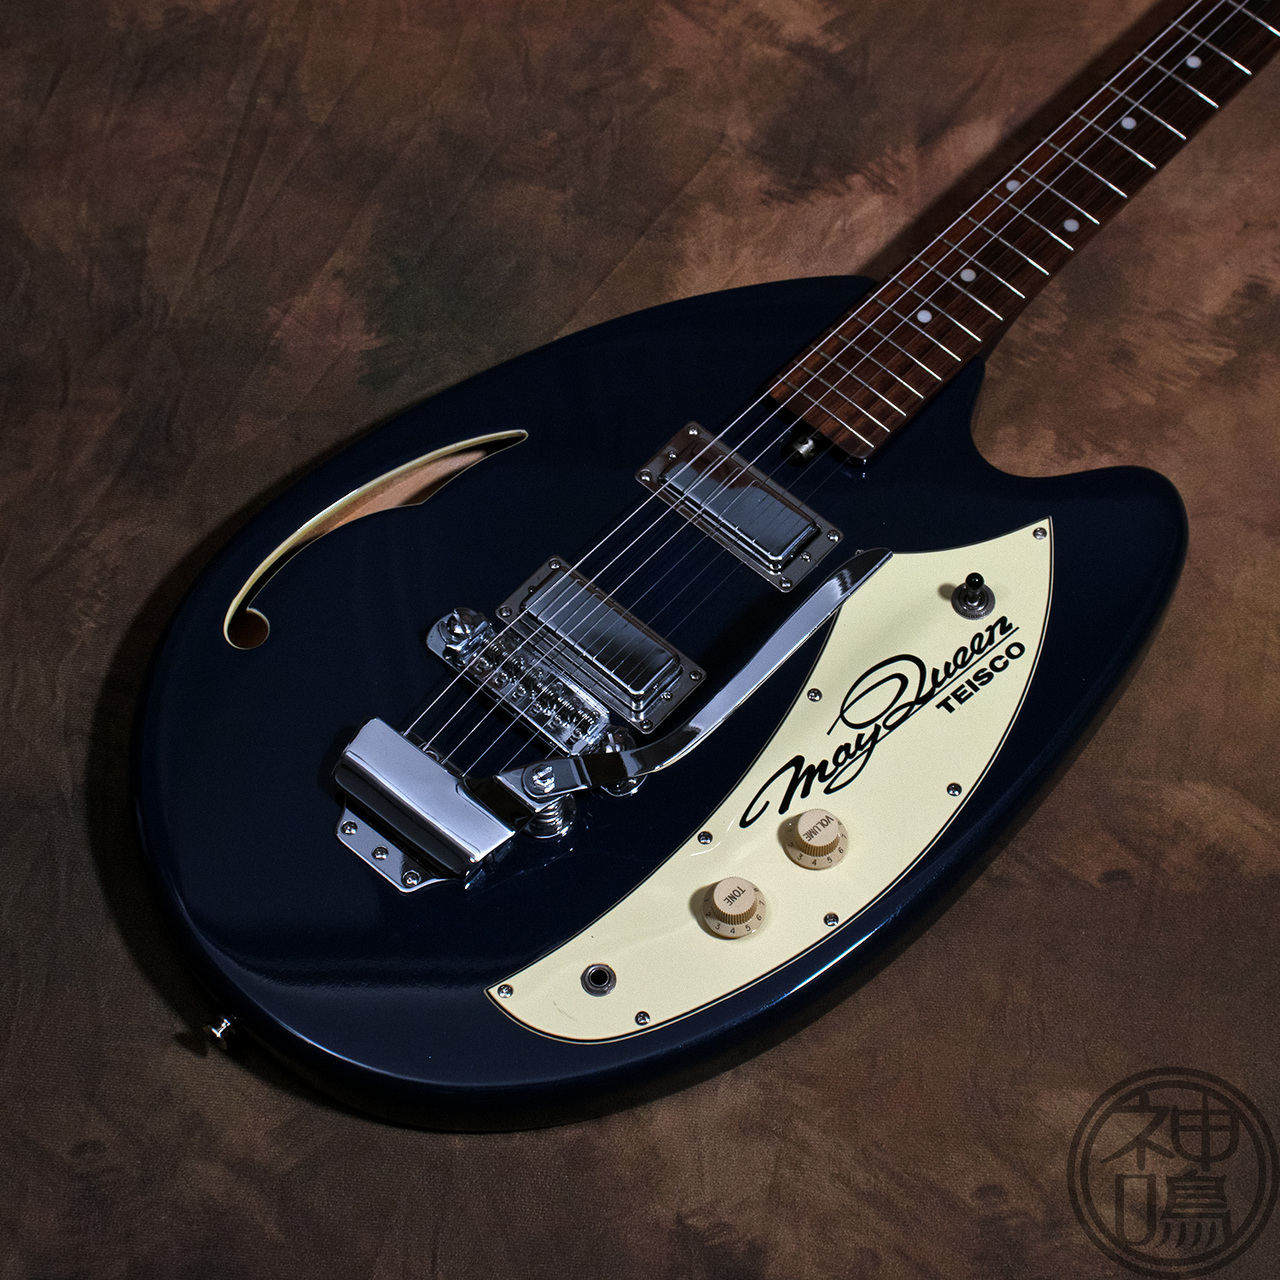 TEISCO MAY QUEEN ベース 希少 生産完了品 - ホビー、カルチャー